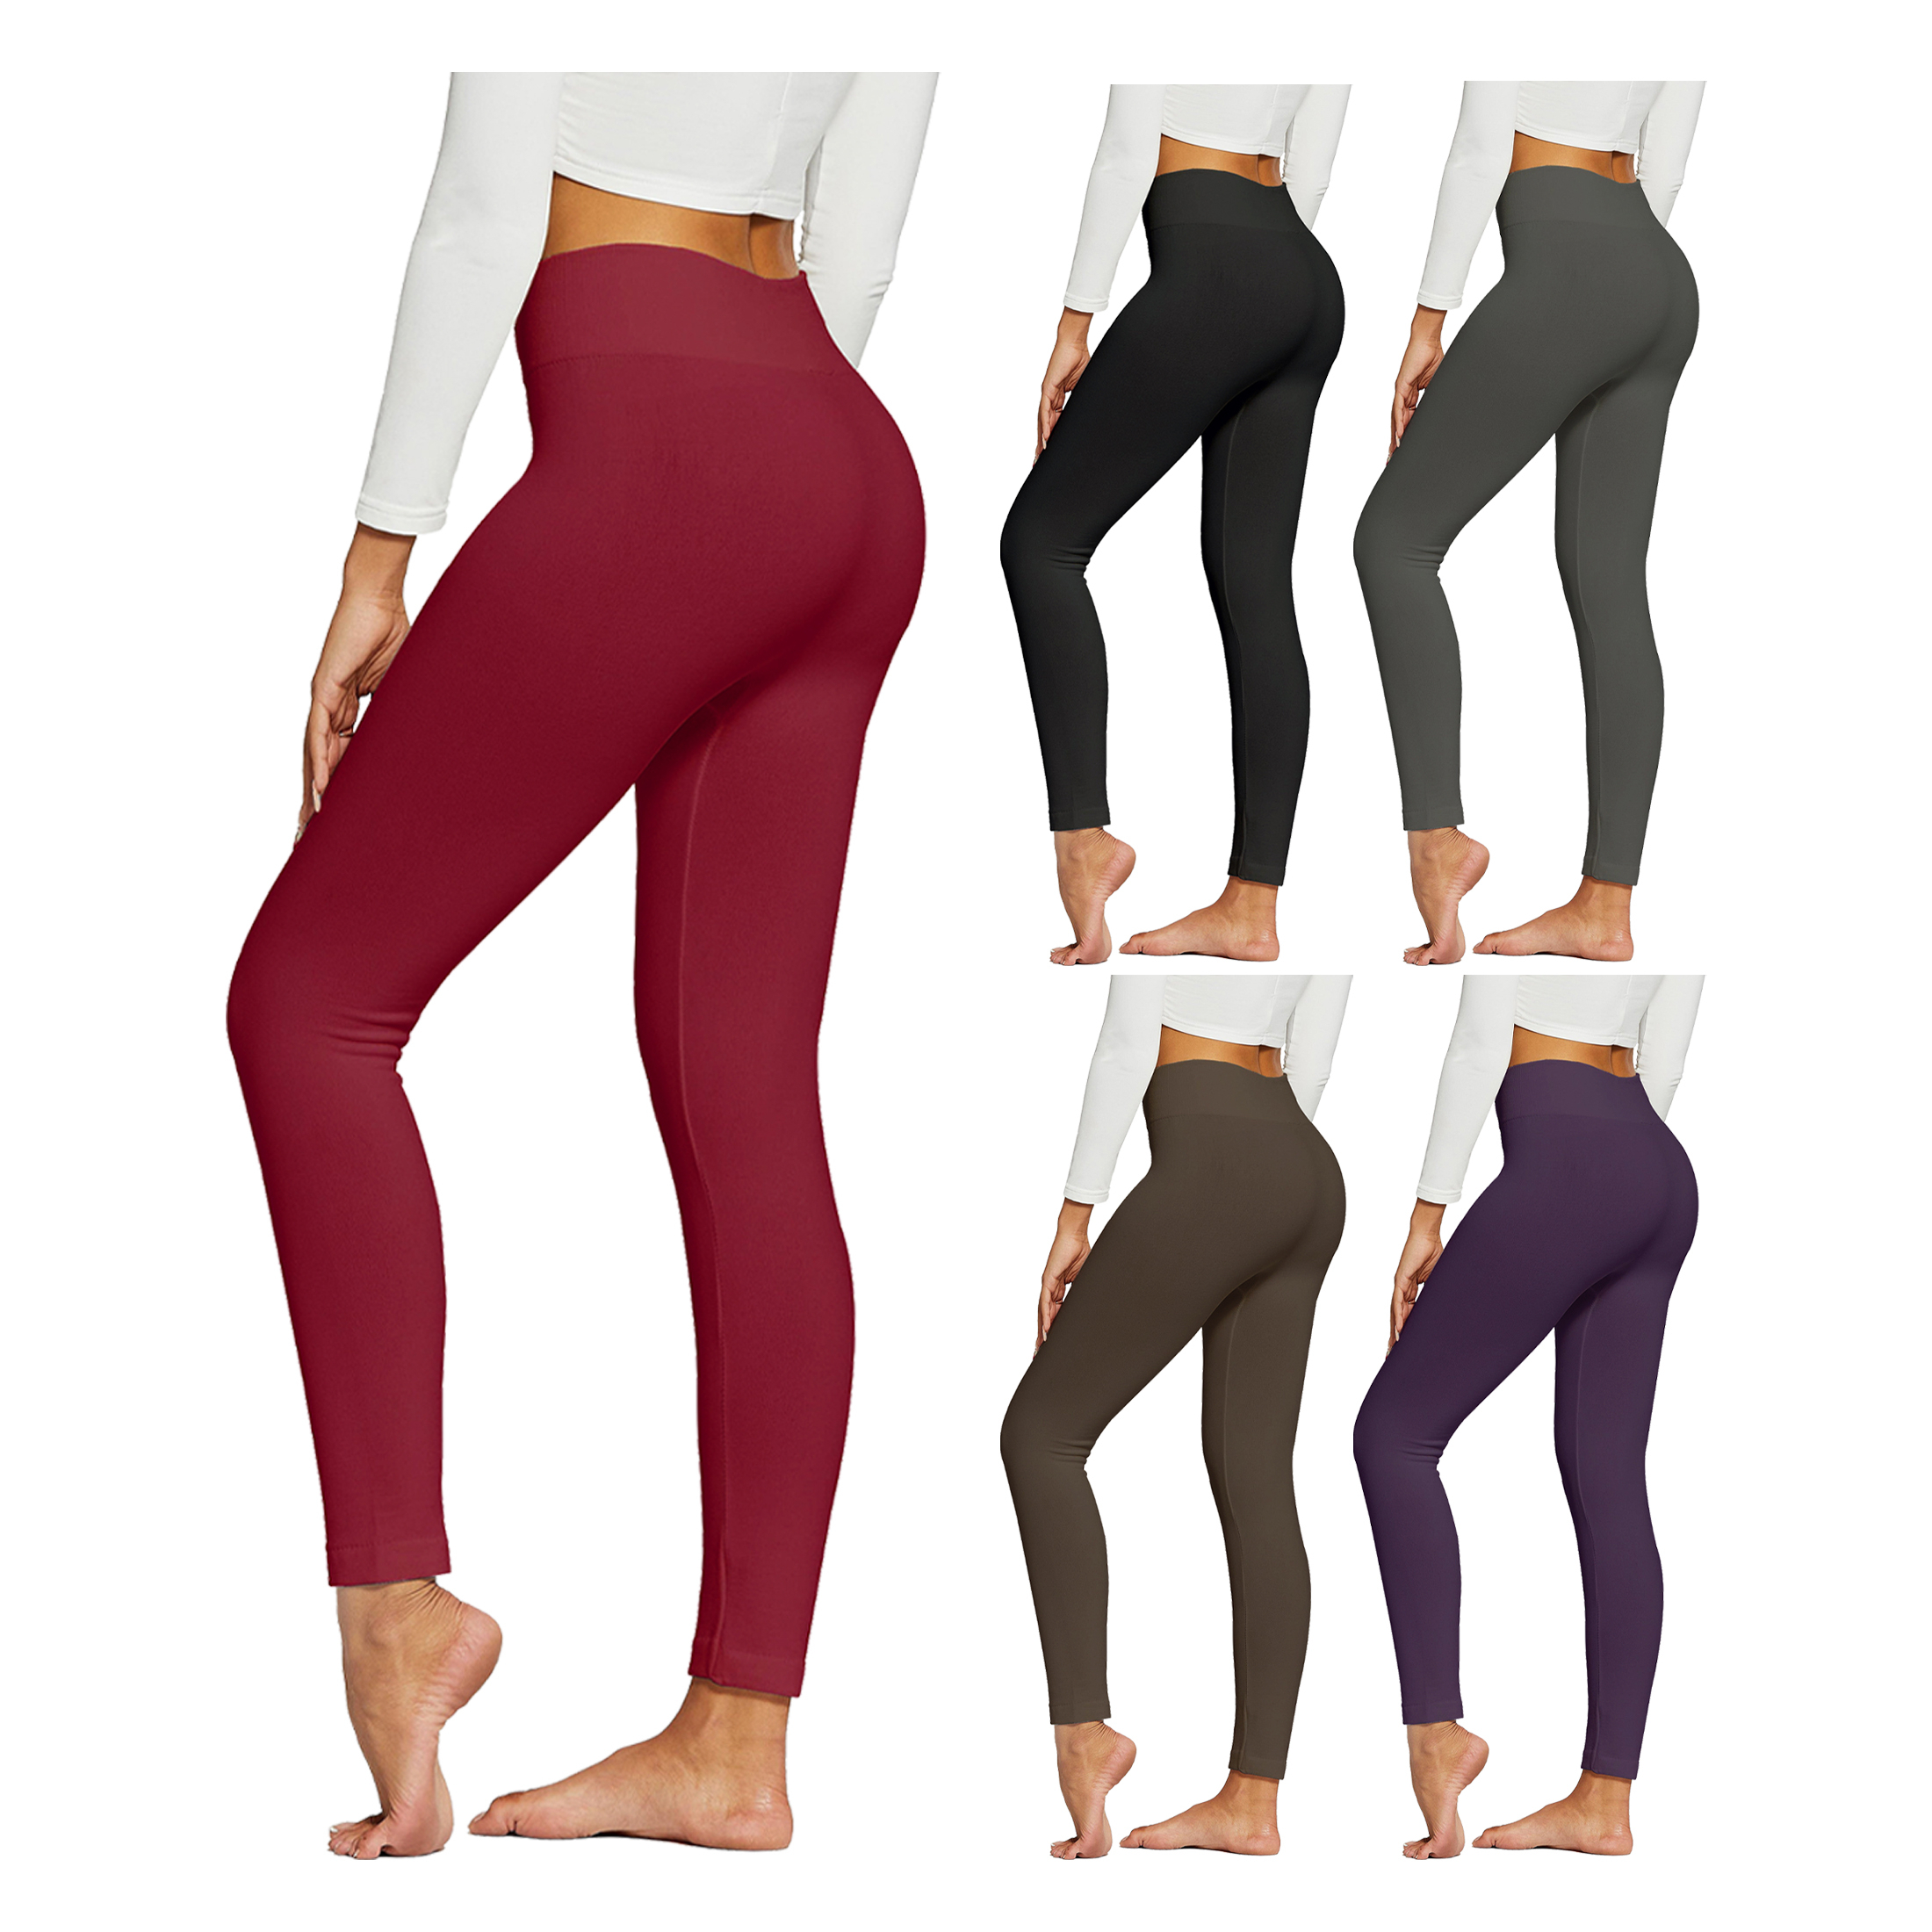 4-Pack:Women's Premium Quality High-Waist Fleece-Lined Leggings (Plus Size Available) - Assorted, 1X/2X